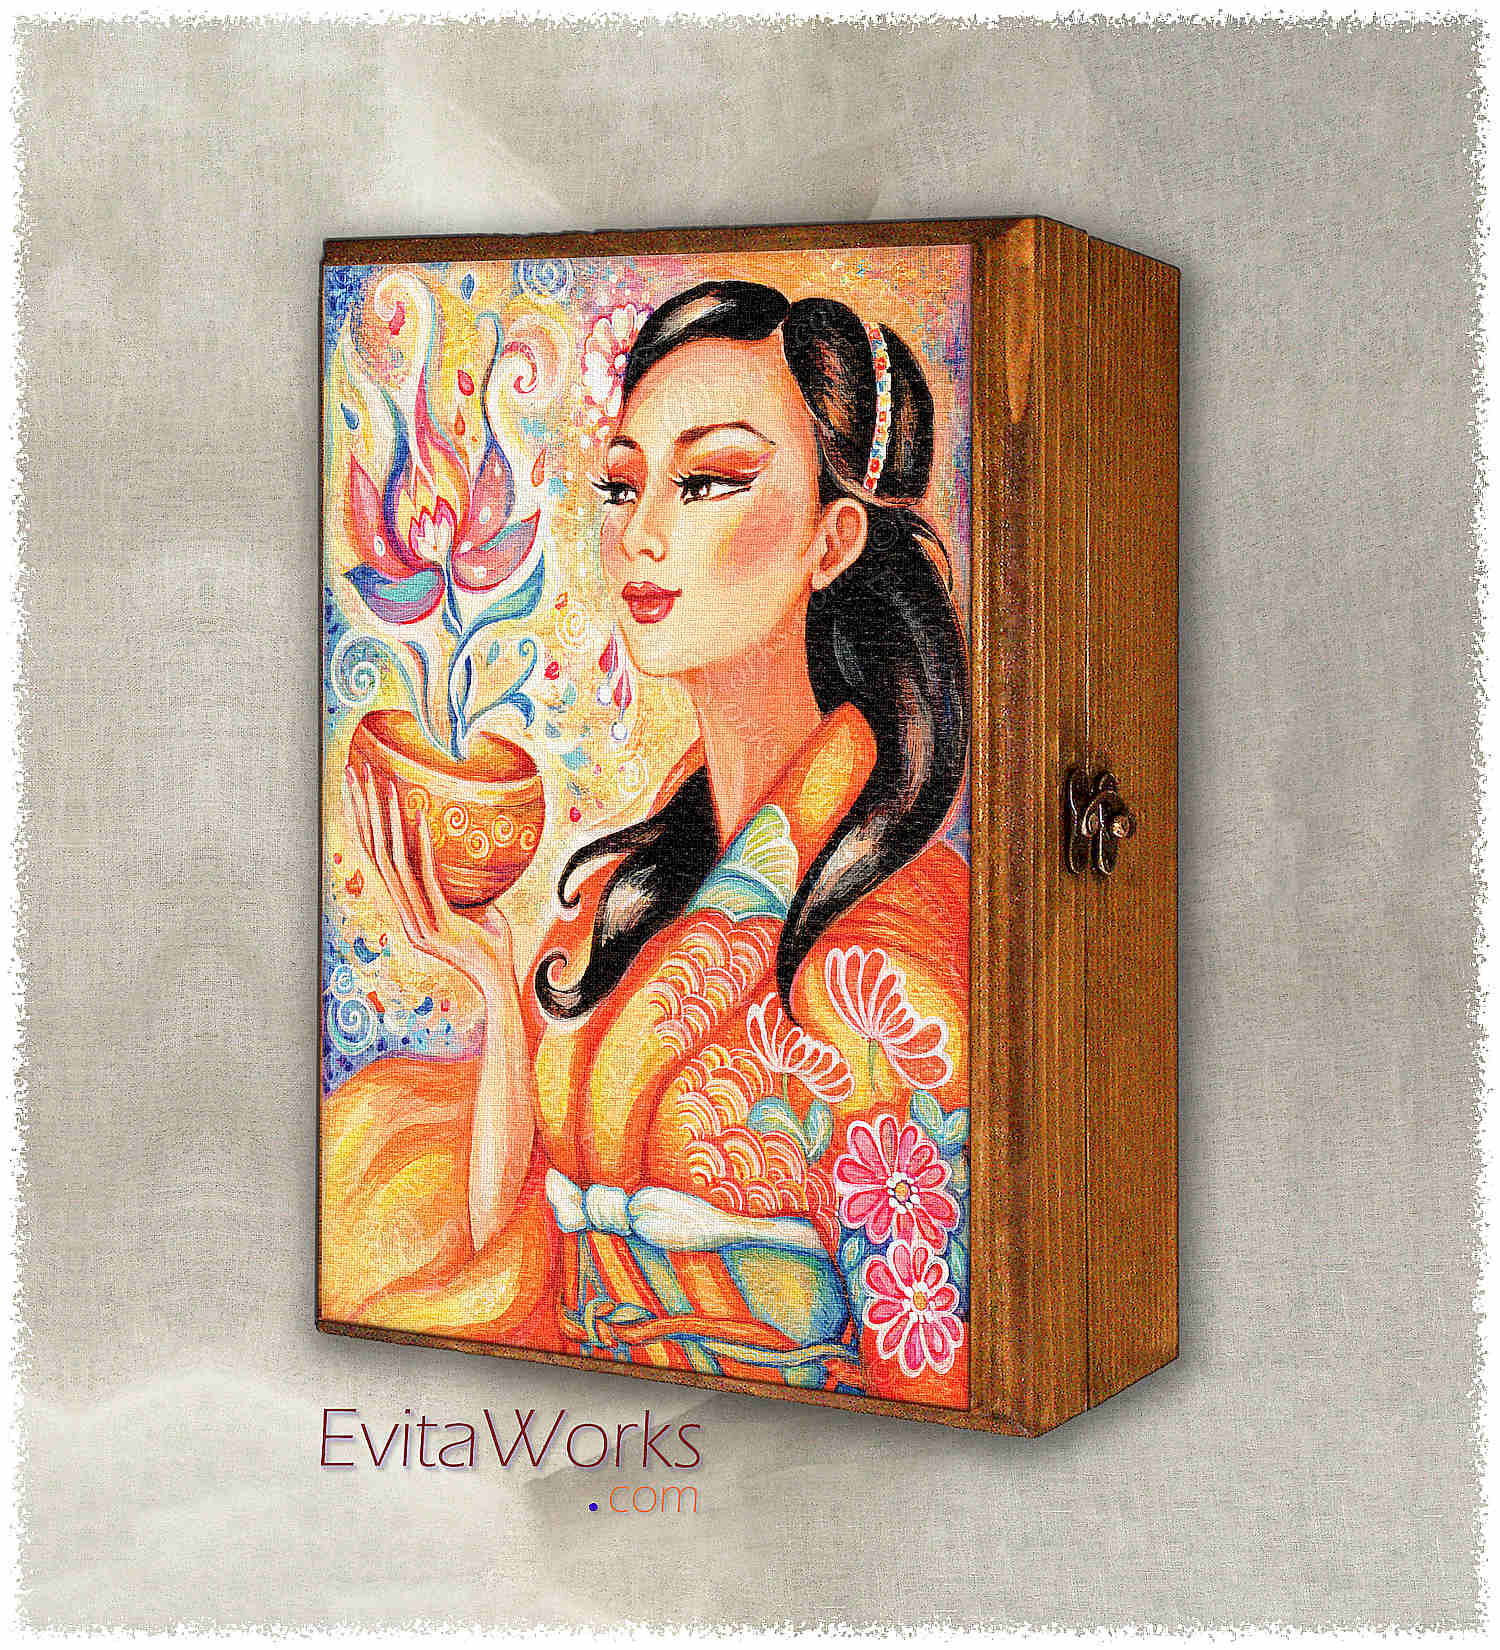 Hit to learn about "Kimono Flower, East woman, beautiful Asian art" on jewelboxes